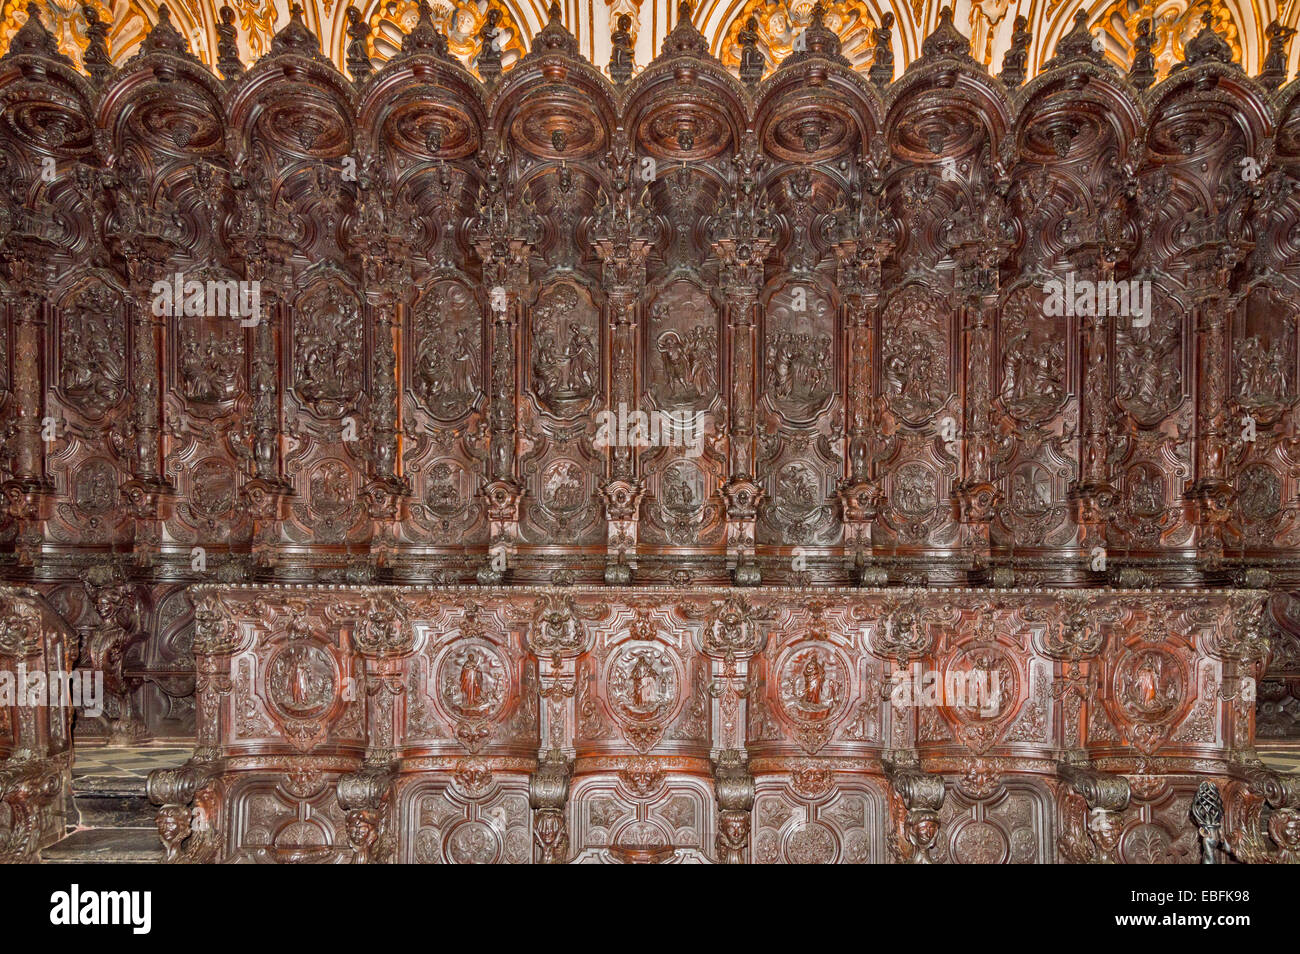 MOSQUE CATHEDRAL OR MEZQUITA CORDOBA THE CHOIR AREA WITH BIBLICAL SCENES EXTENSIVELY CARVED IN WOOD Stock Photo